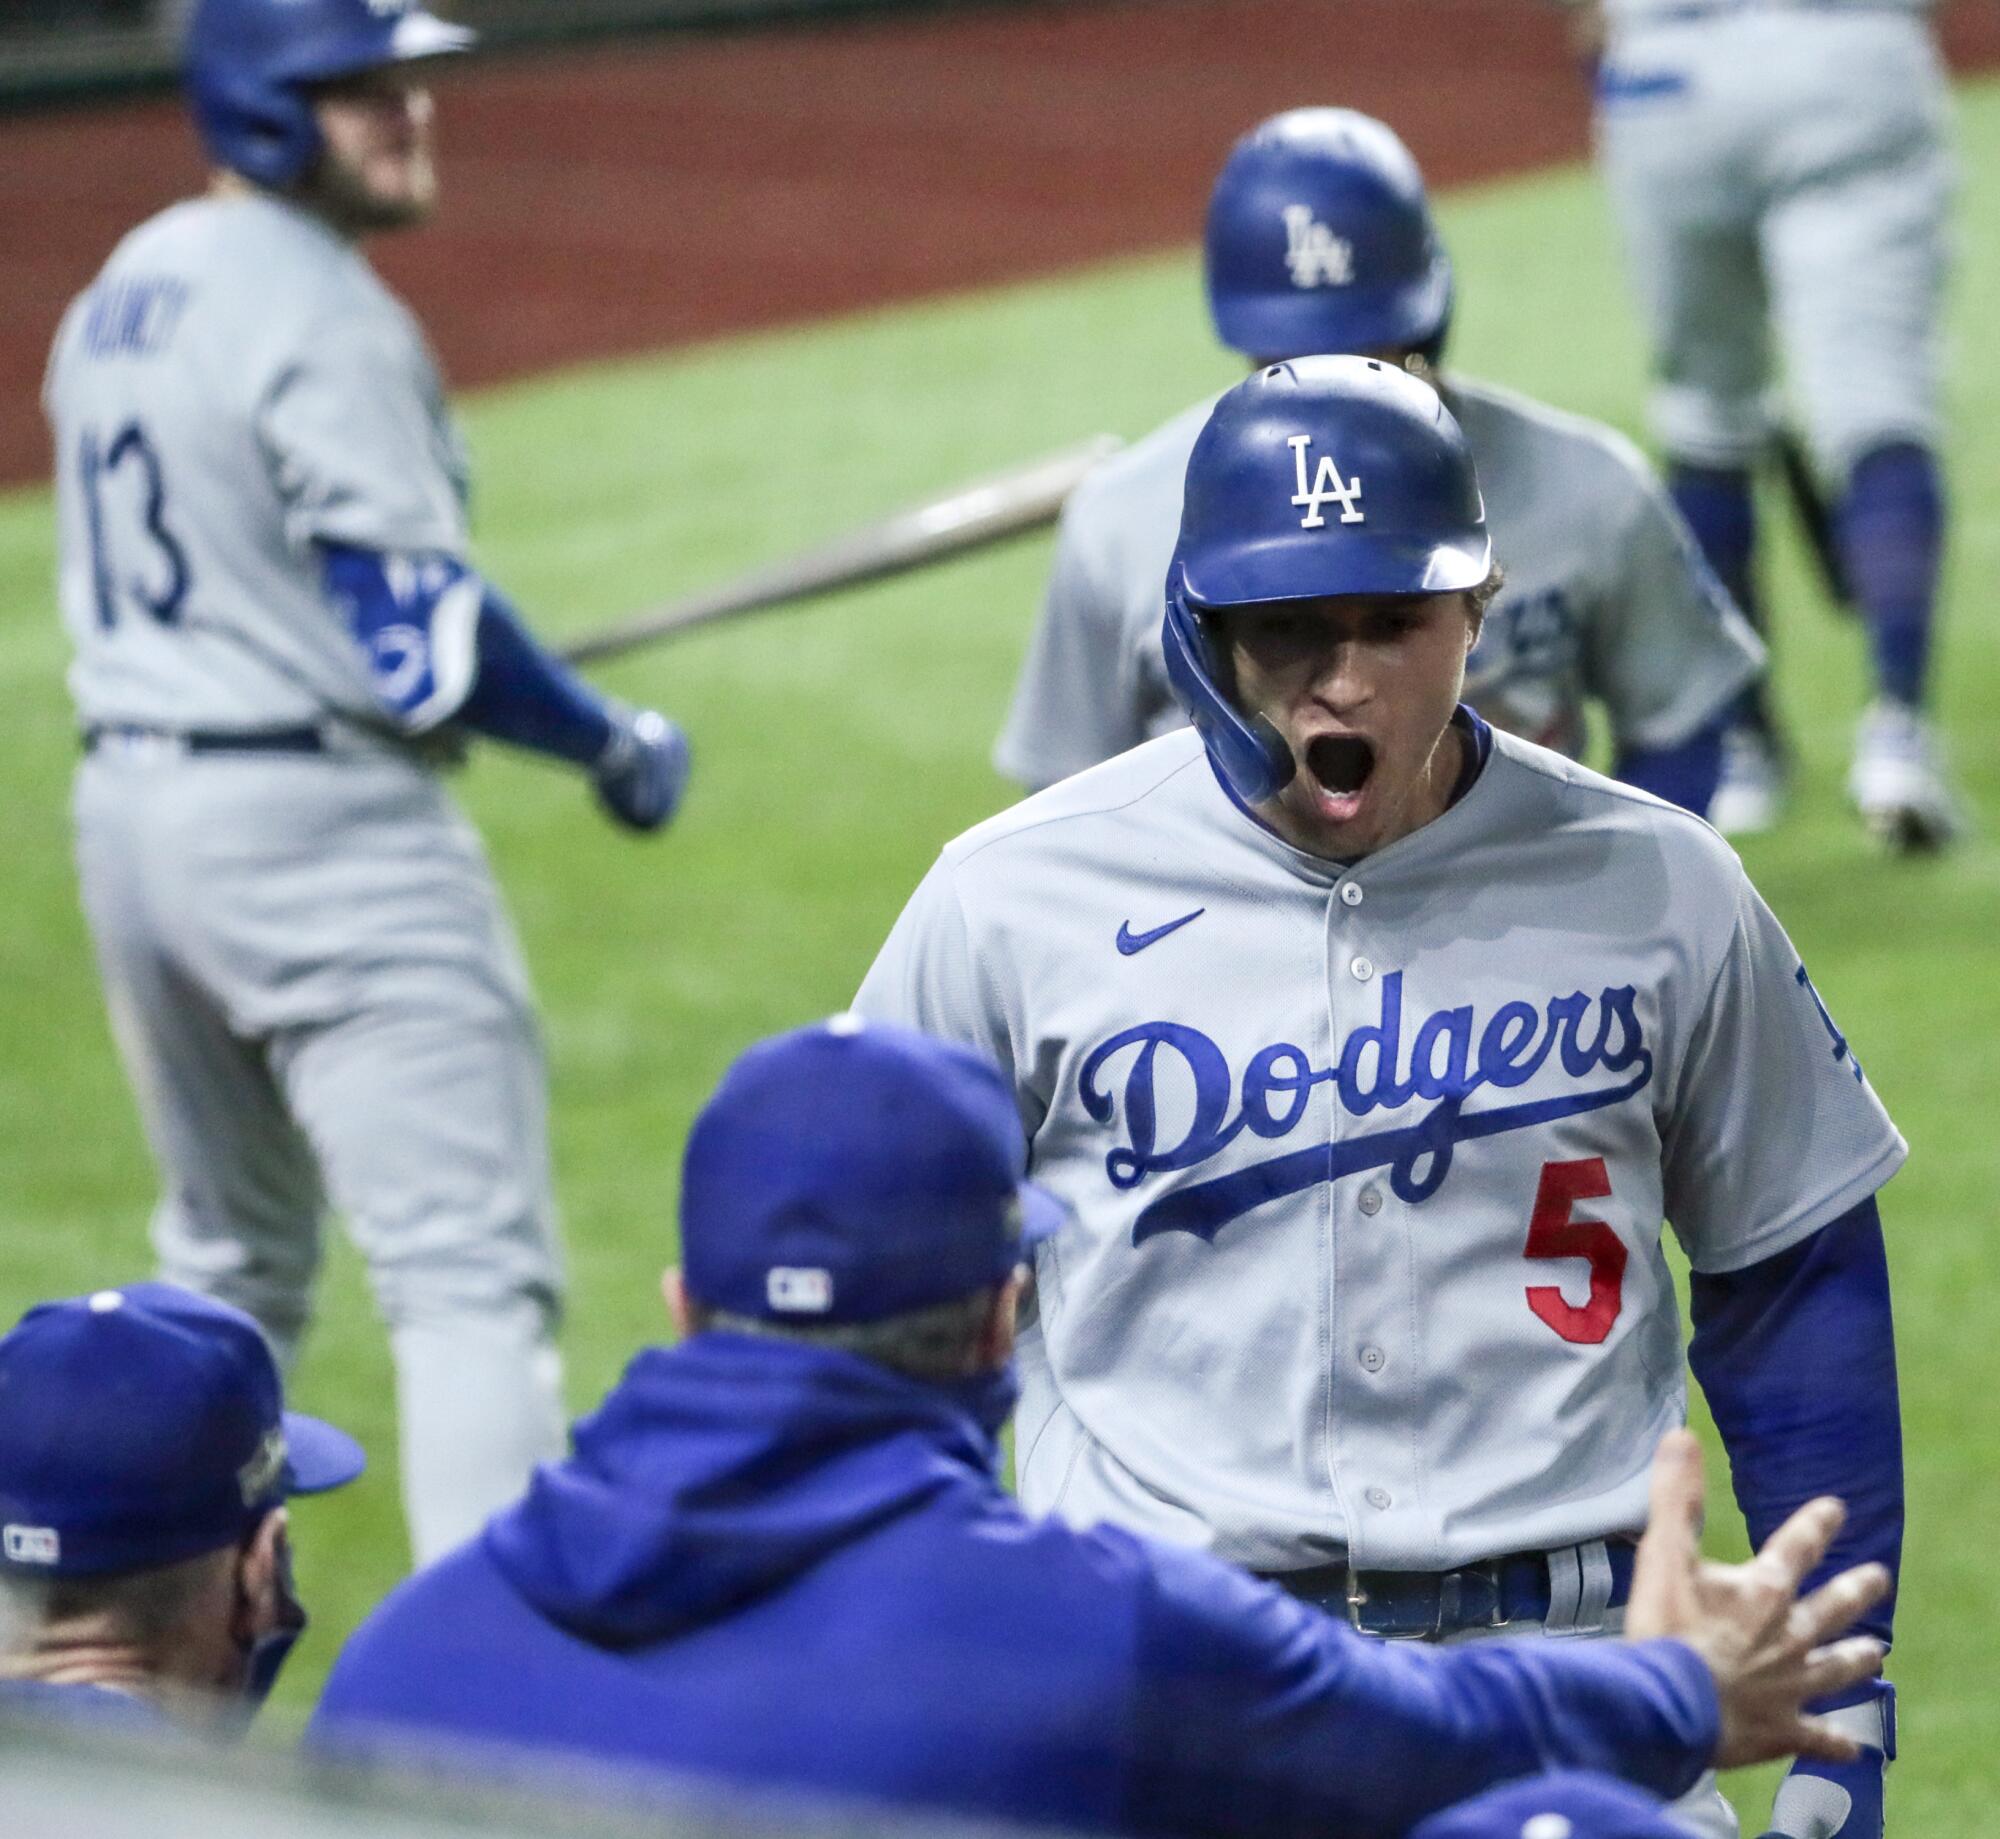 Dodgers shortstop Corey Seager celebrates after hitting a two-run home run in the seventh inning.